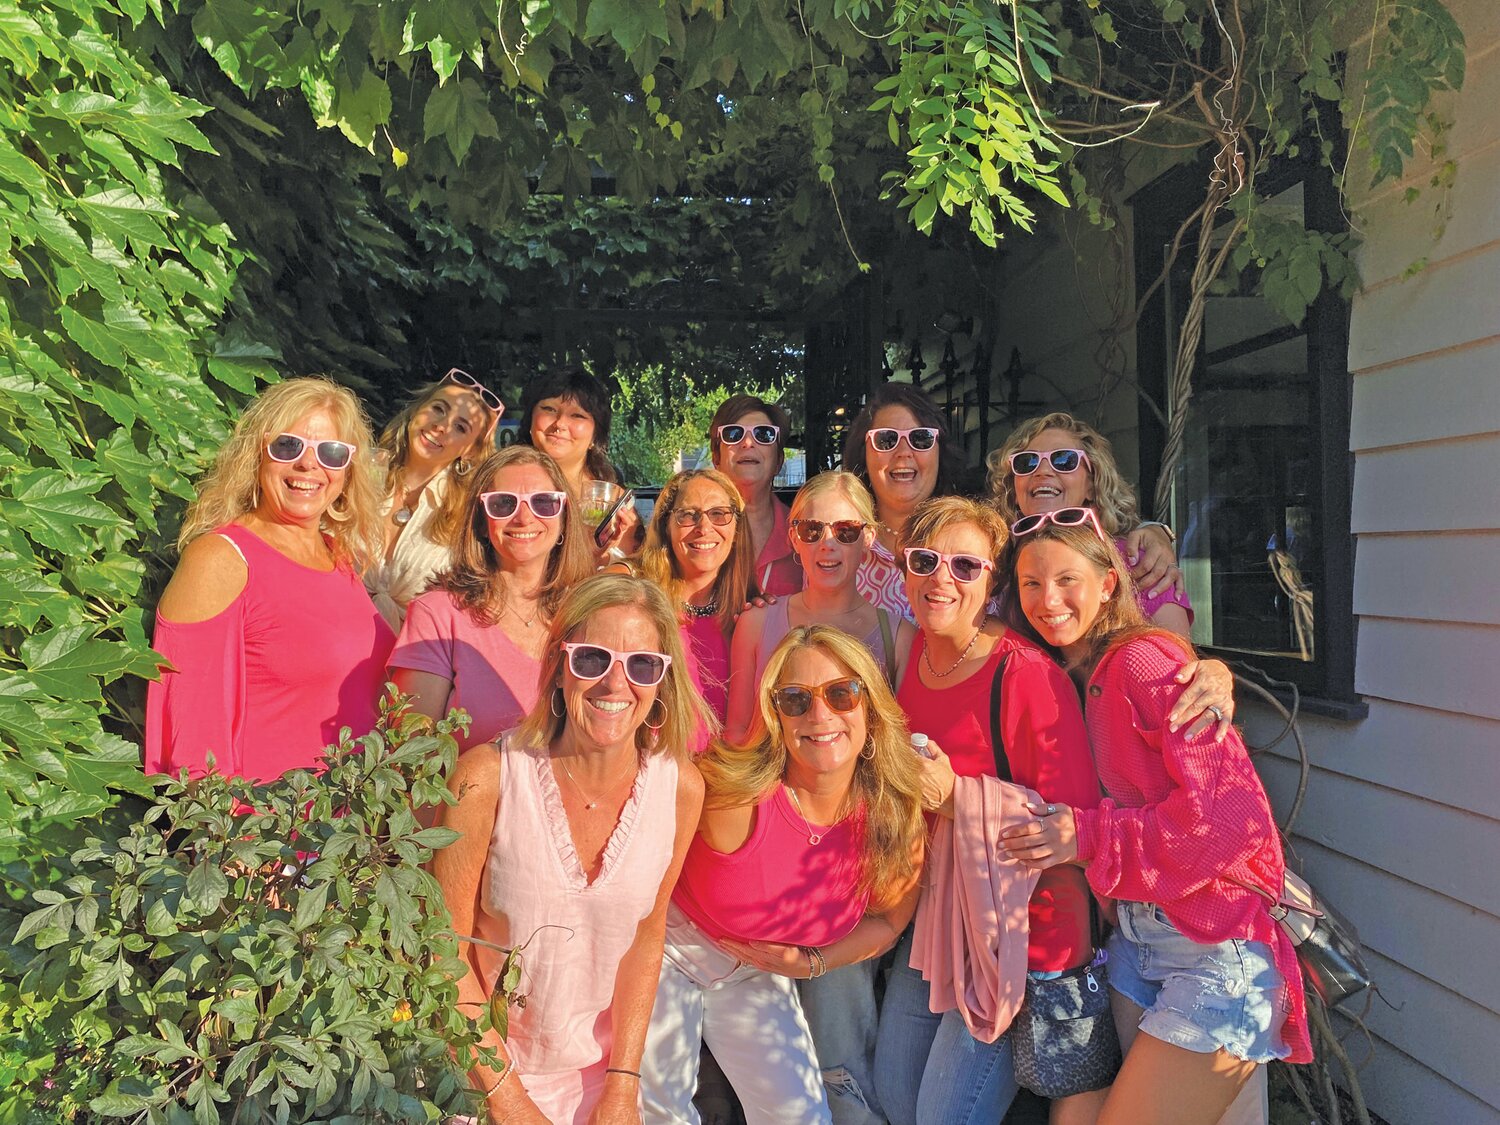 Spotted in Doylestown Borough: These pink ladies are headed to a showing of “Barbie.”